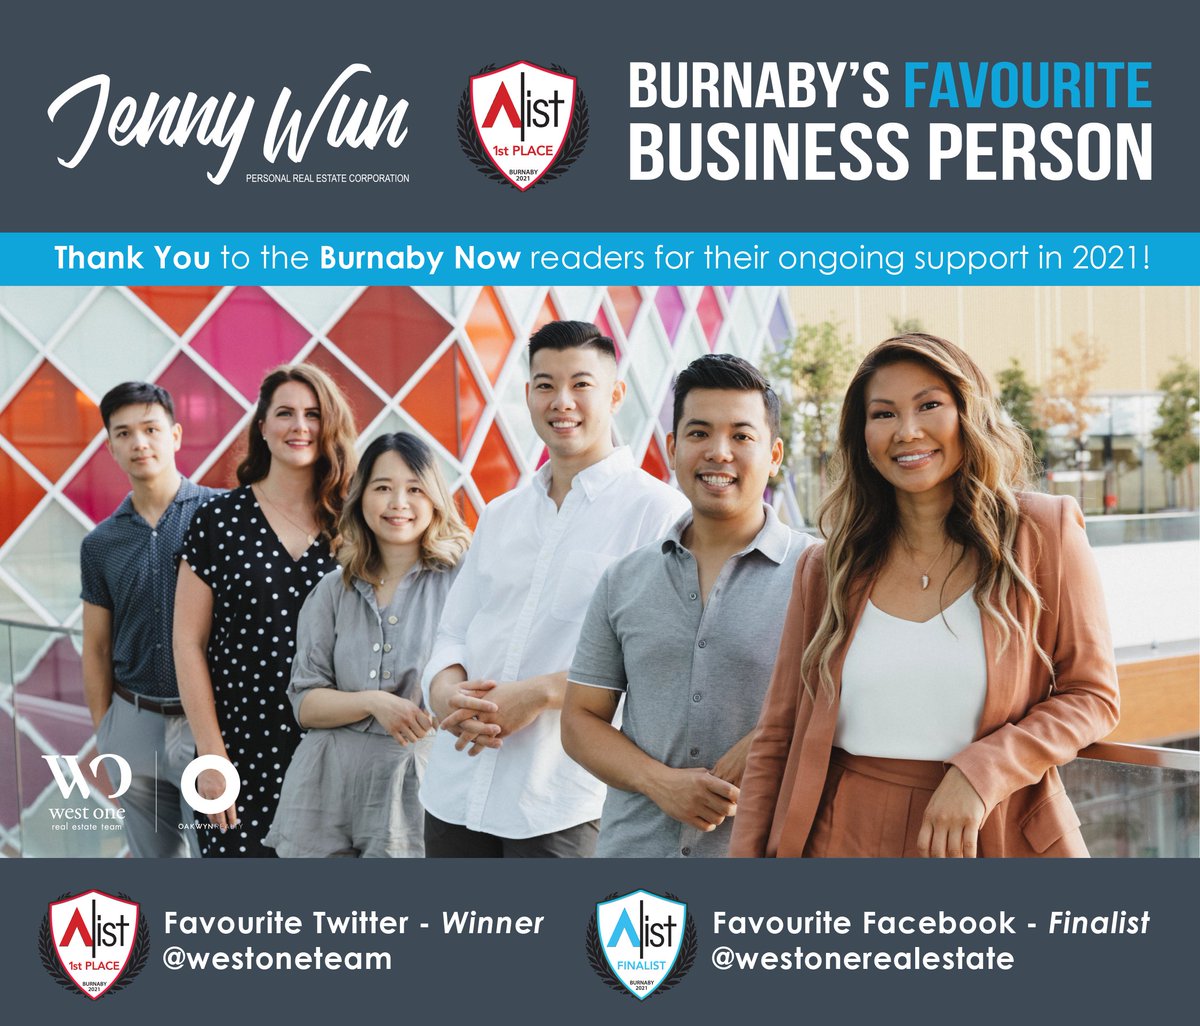 We are excited to announce for the 2nd year in a row Jenny Wun has been named Burnaby's FAVOURITE LOCAL BUSINESS PERSON in the A-LIST 2021 Awards by the readers of @BurnabyNOW_News! Congratulations to all of the other 2021 winners!
https://t.co/nxOChrNPOj https://t.co/SZOlel1BzD